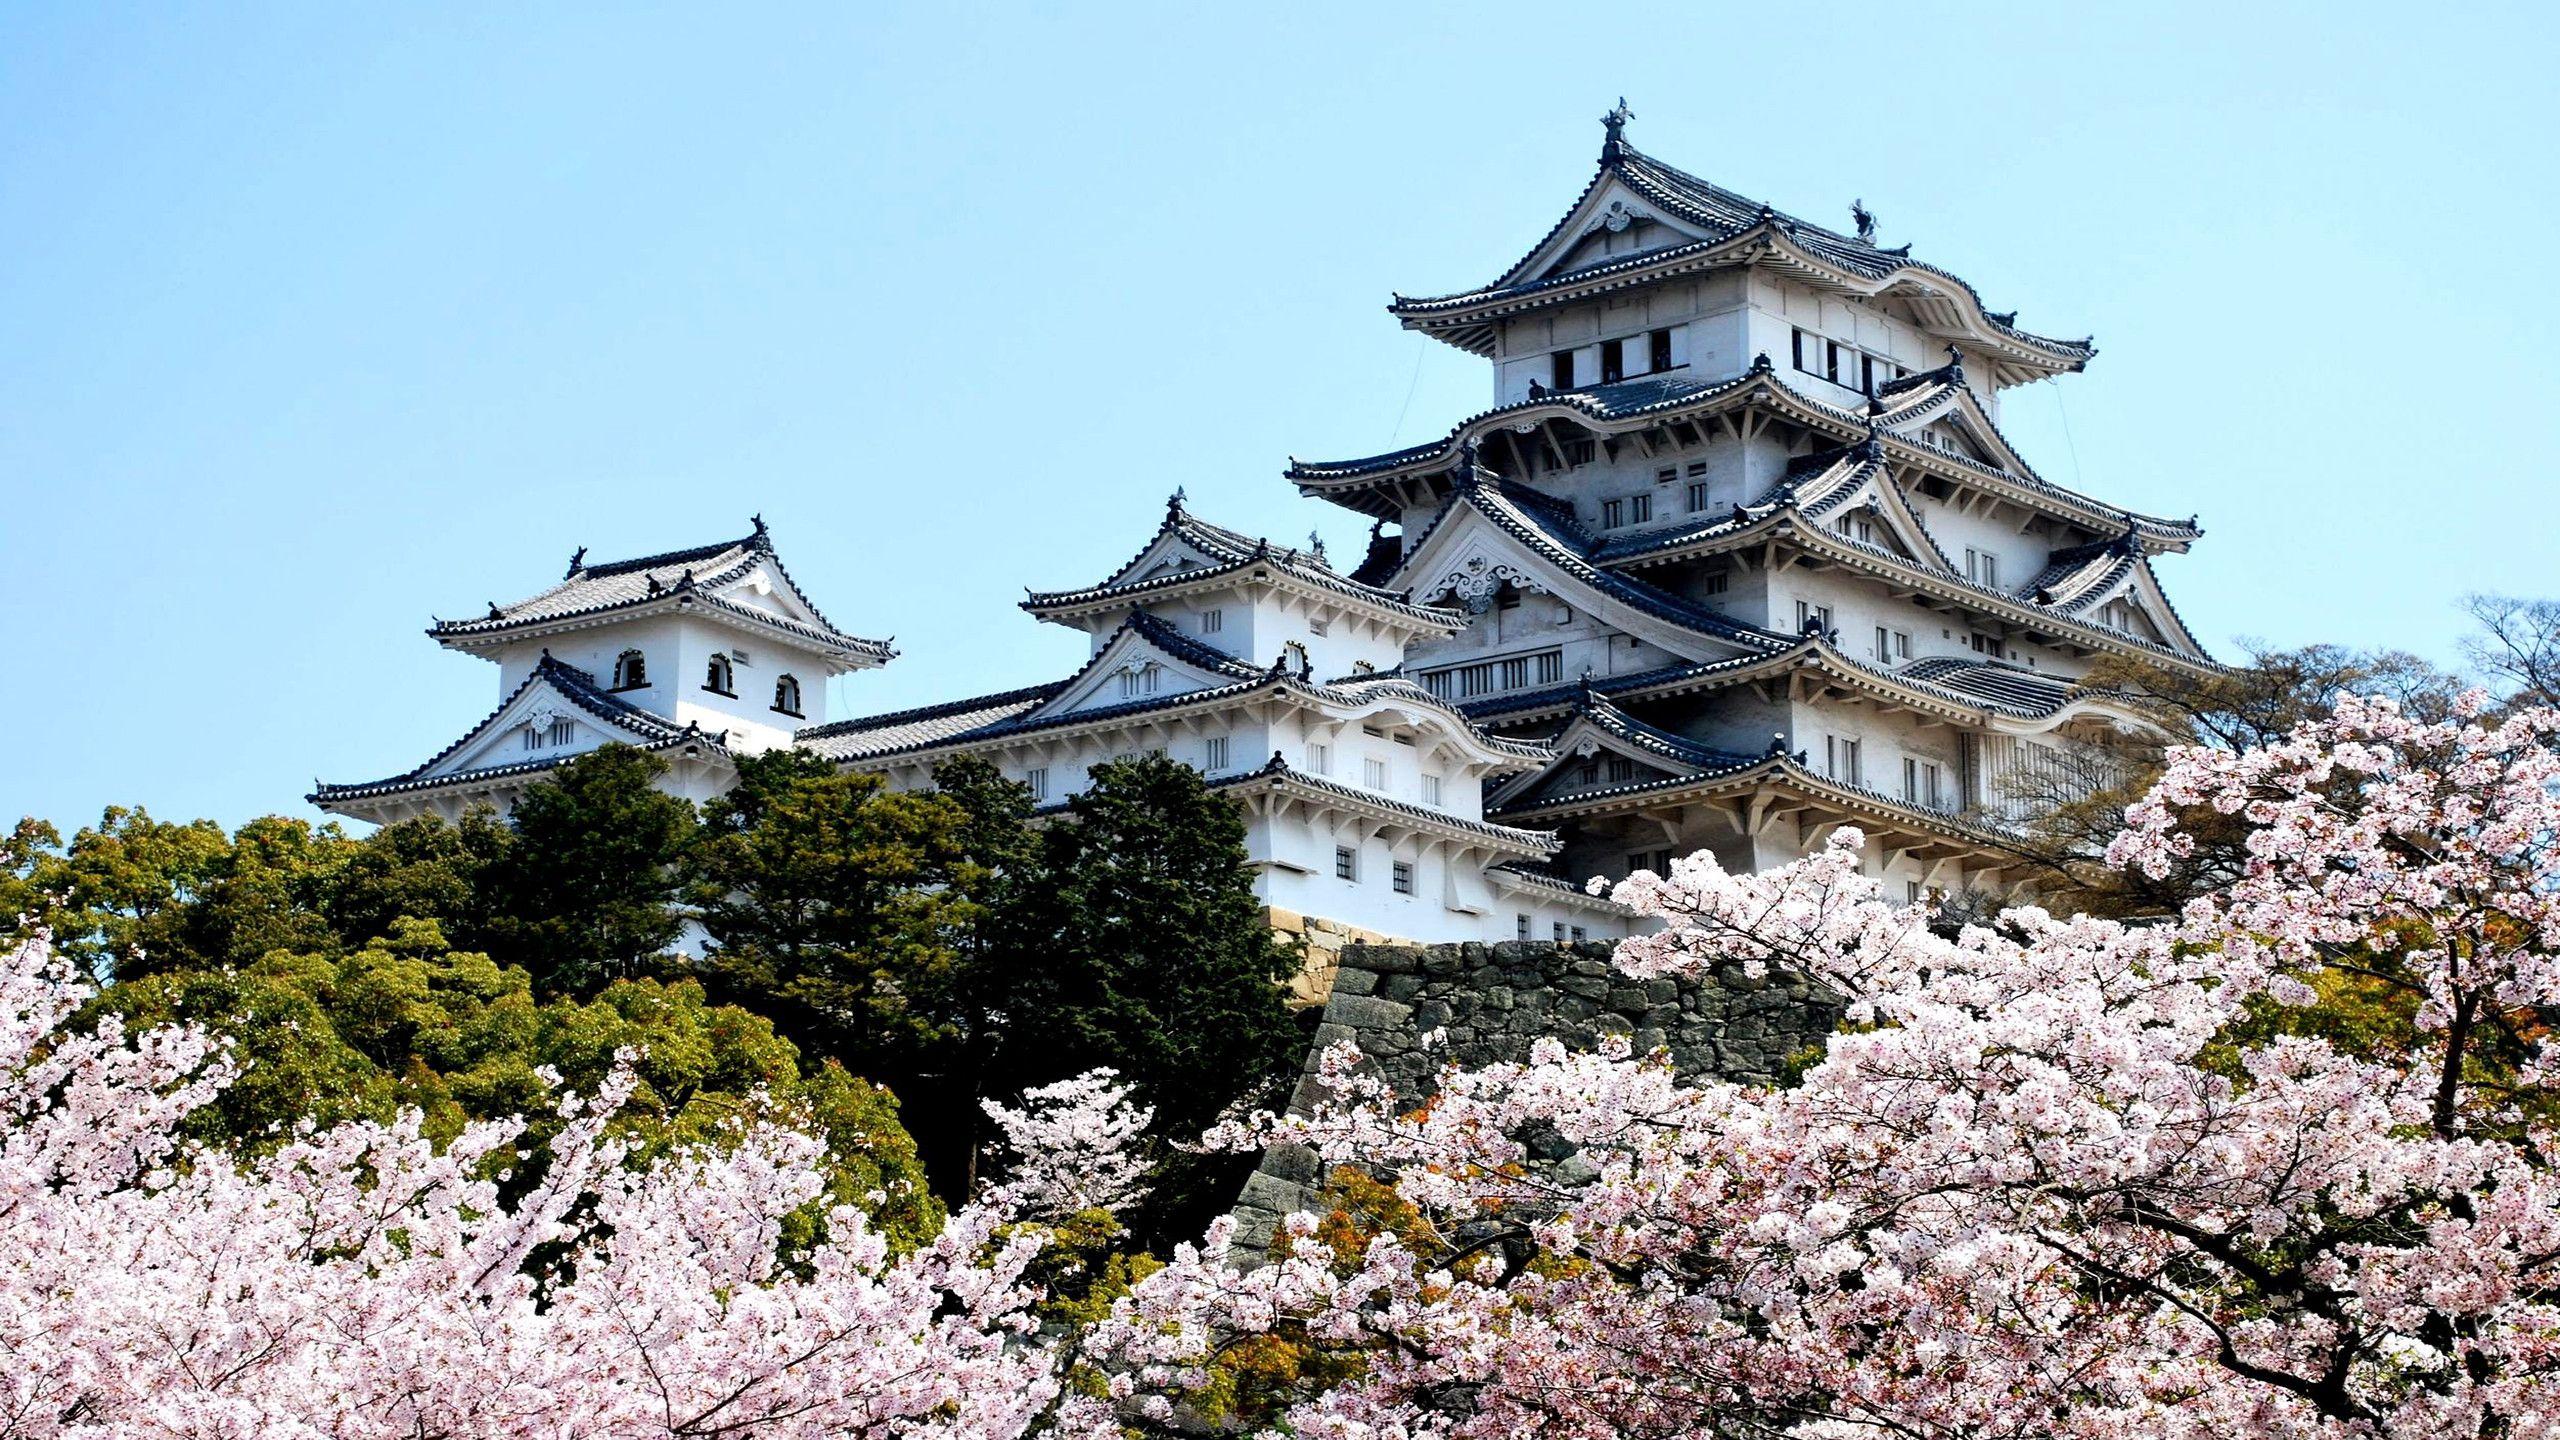 Japanese Castle Wallpapers Top Free Japanese Castle Backgrounds Images, Photos, Reviews